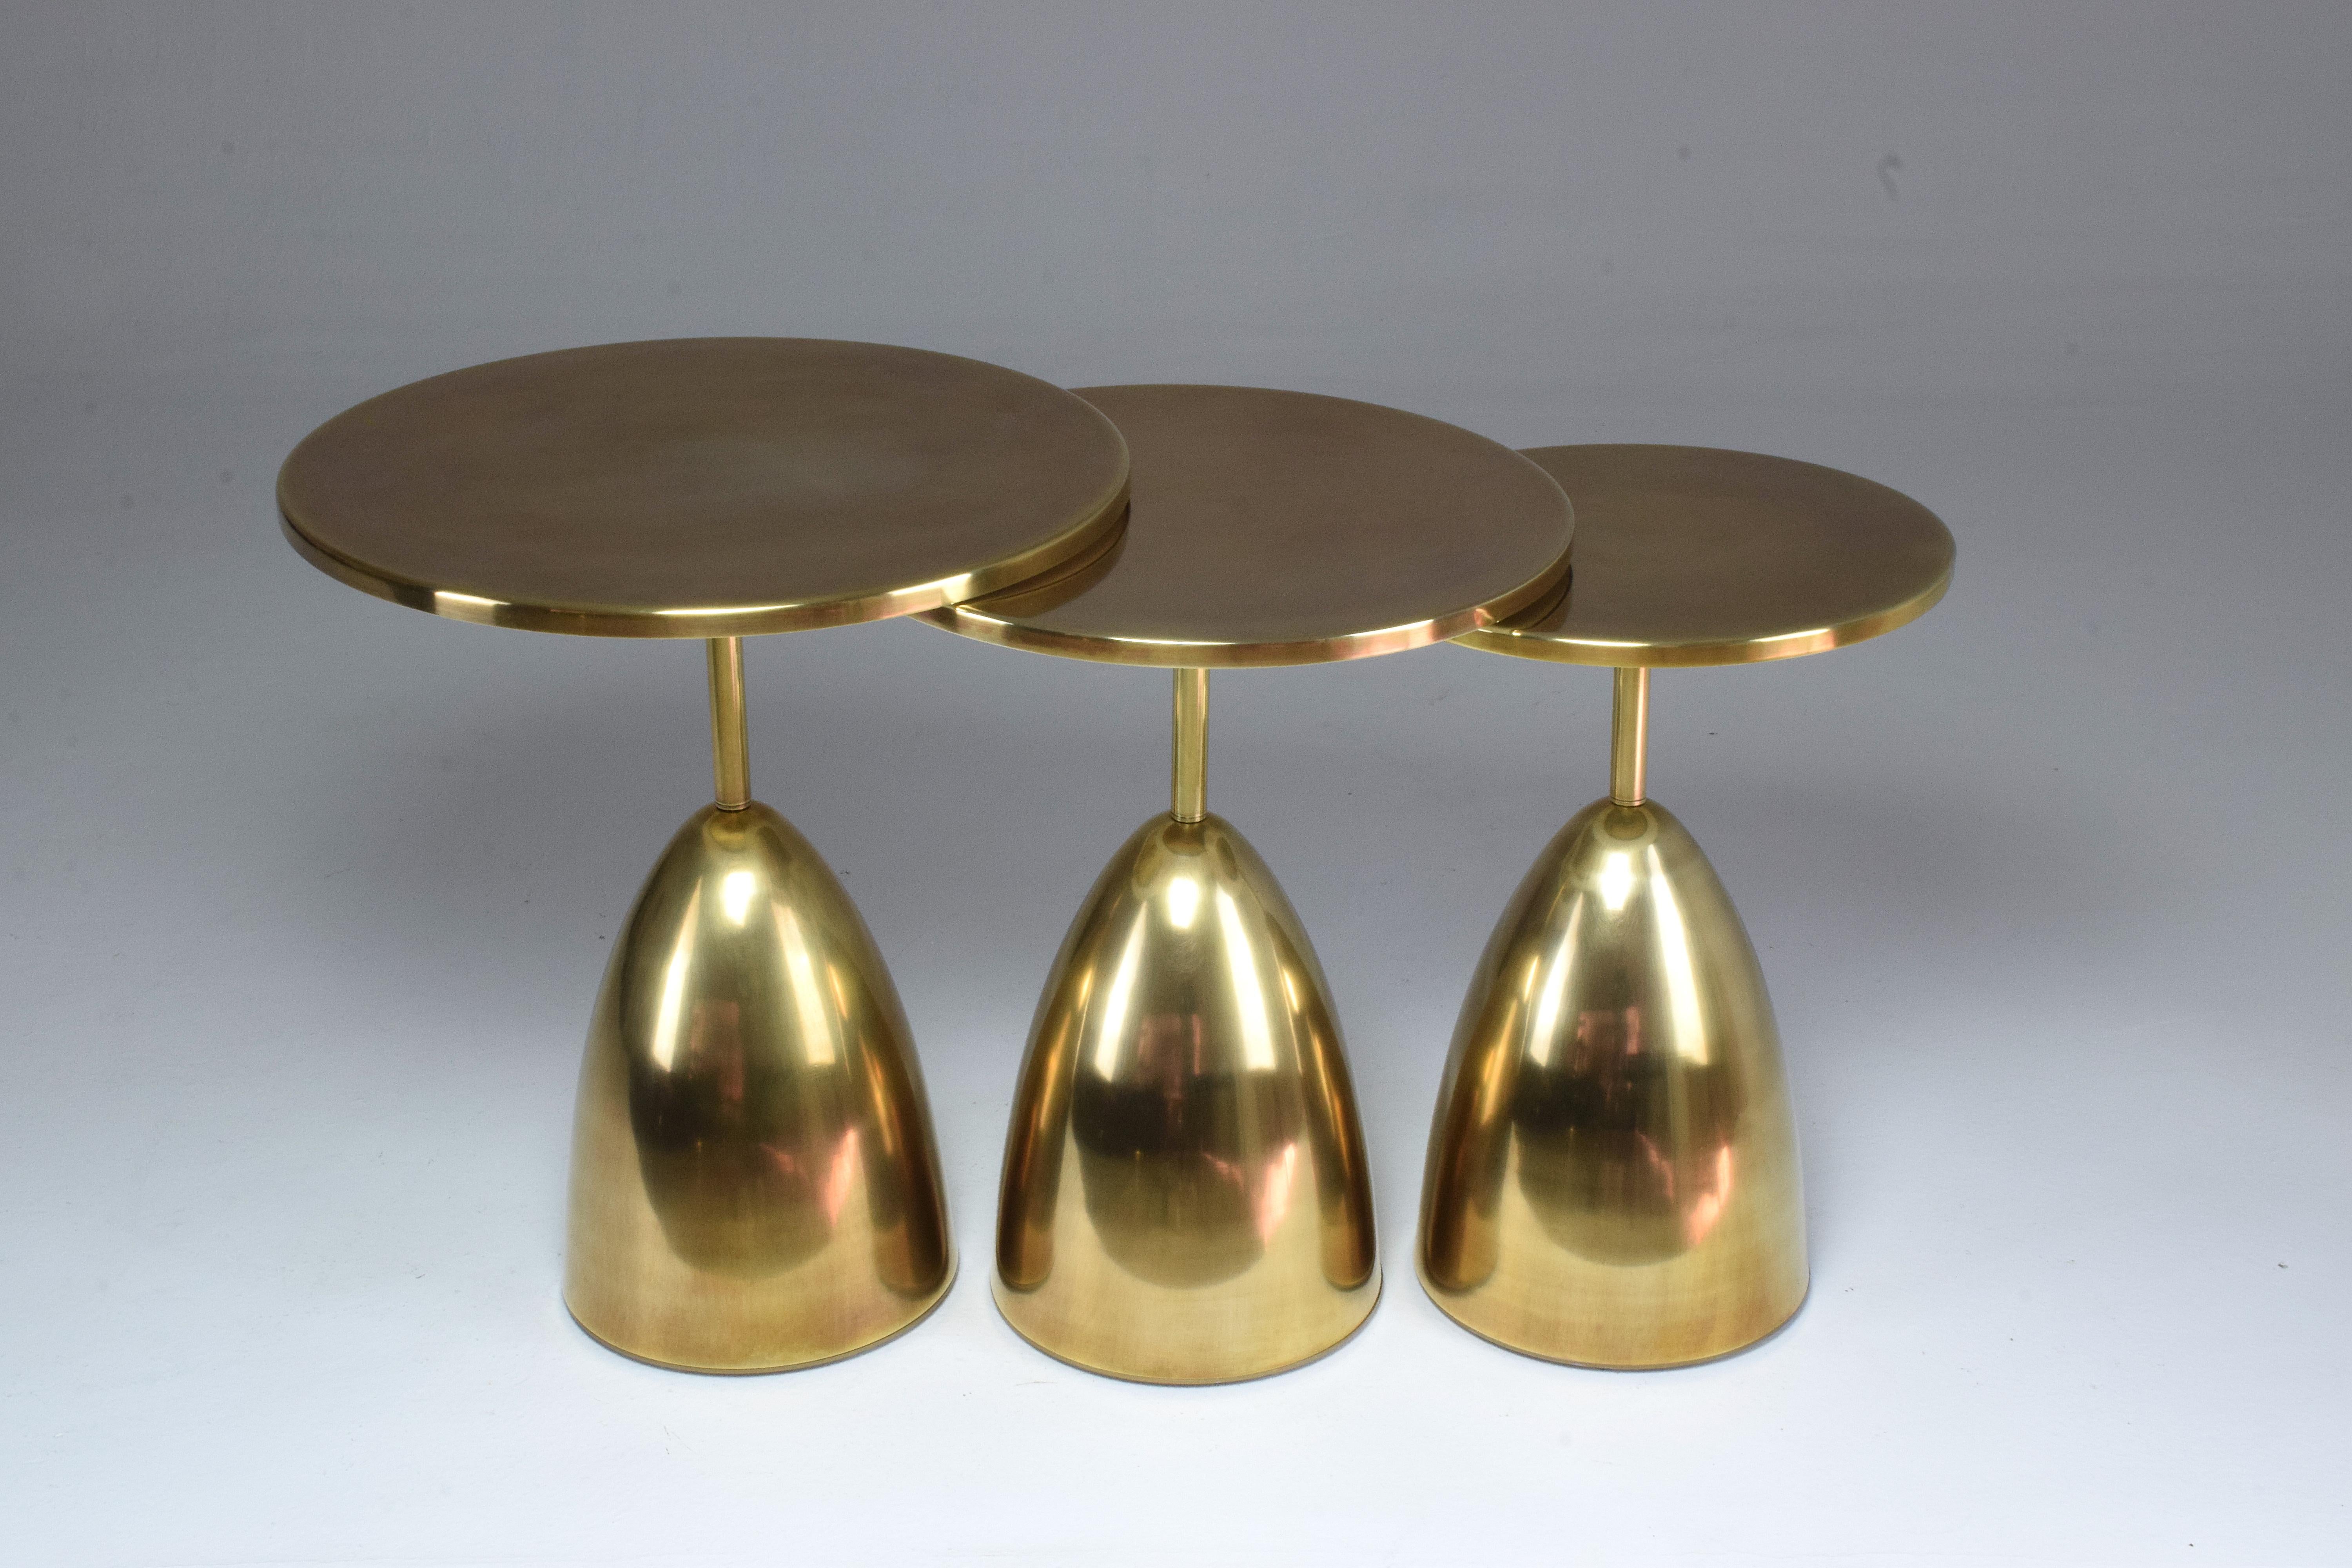  Pair of Or-Ora handcrafted brass side tables by Jonathan Amar Studio  For Sale 7